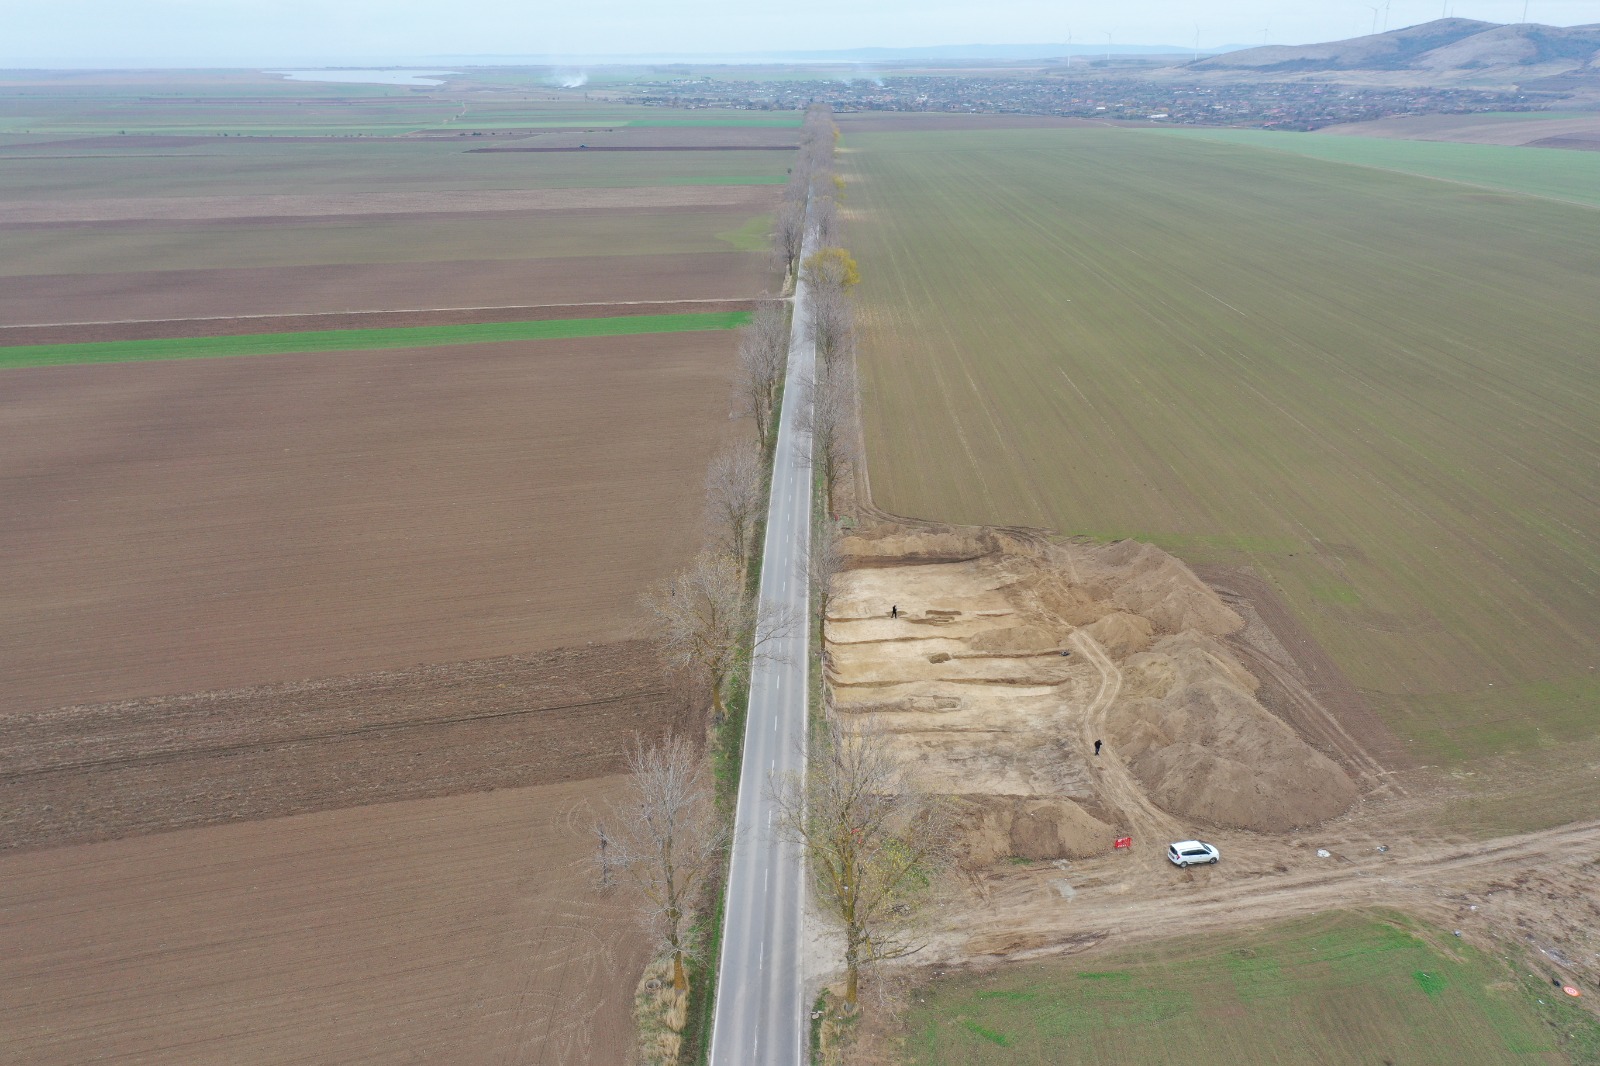 E-Distribuție Dobrogea invested 1.7 million lei in a medium voltage line in Tulcea county and facilitated the research of an archaeological site dating back from 3200 BC